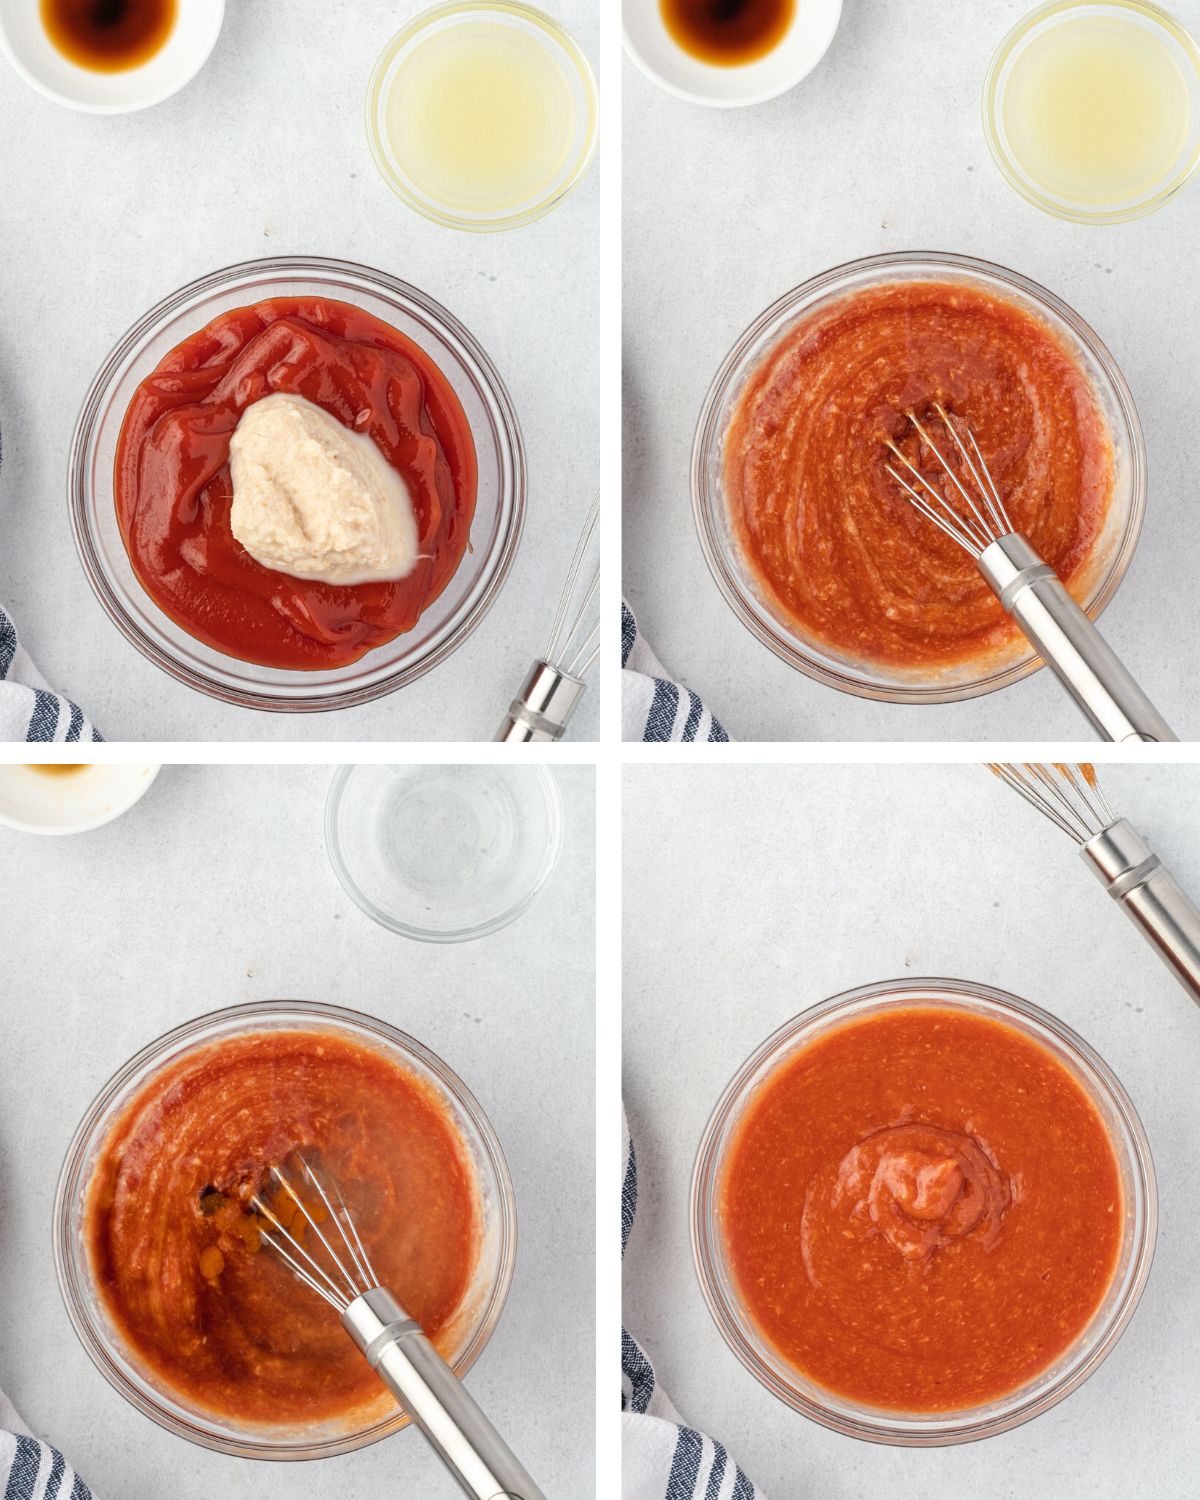 4 images showing the sauce being made, from adding horseradish, to whisking in worcestershire.